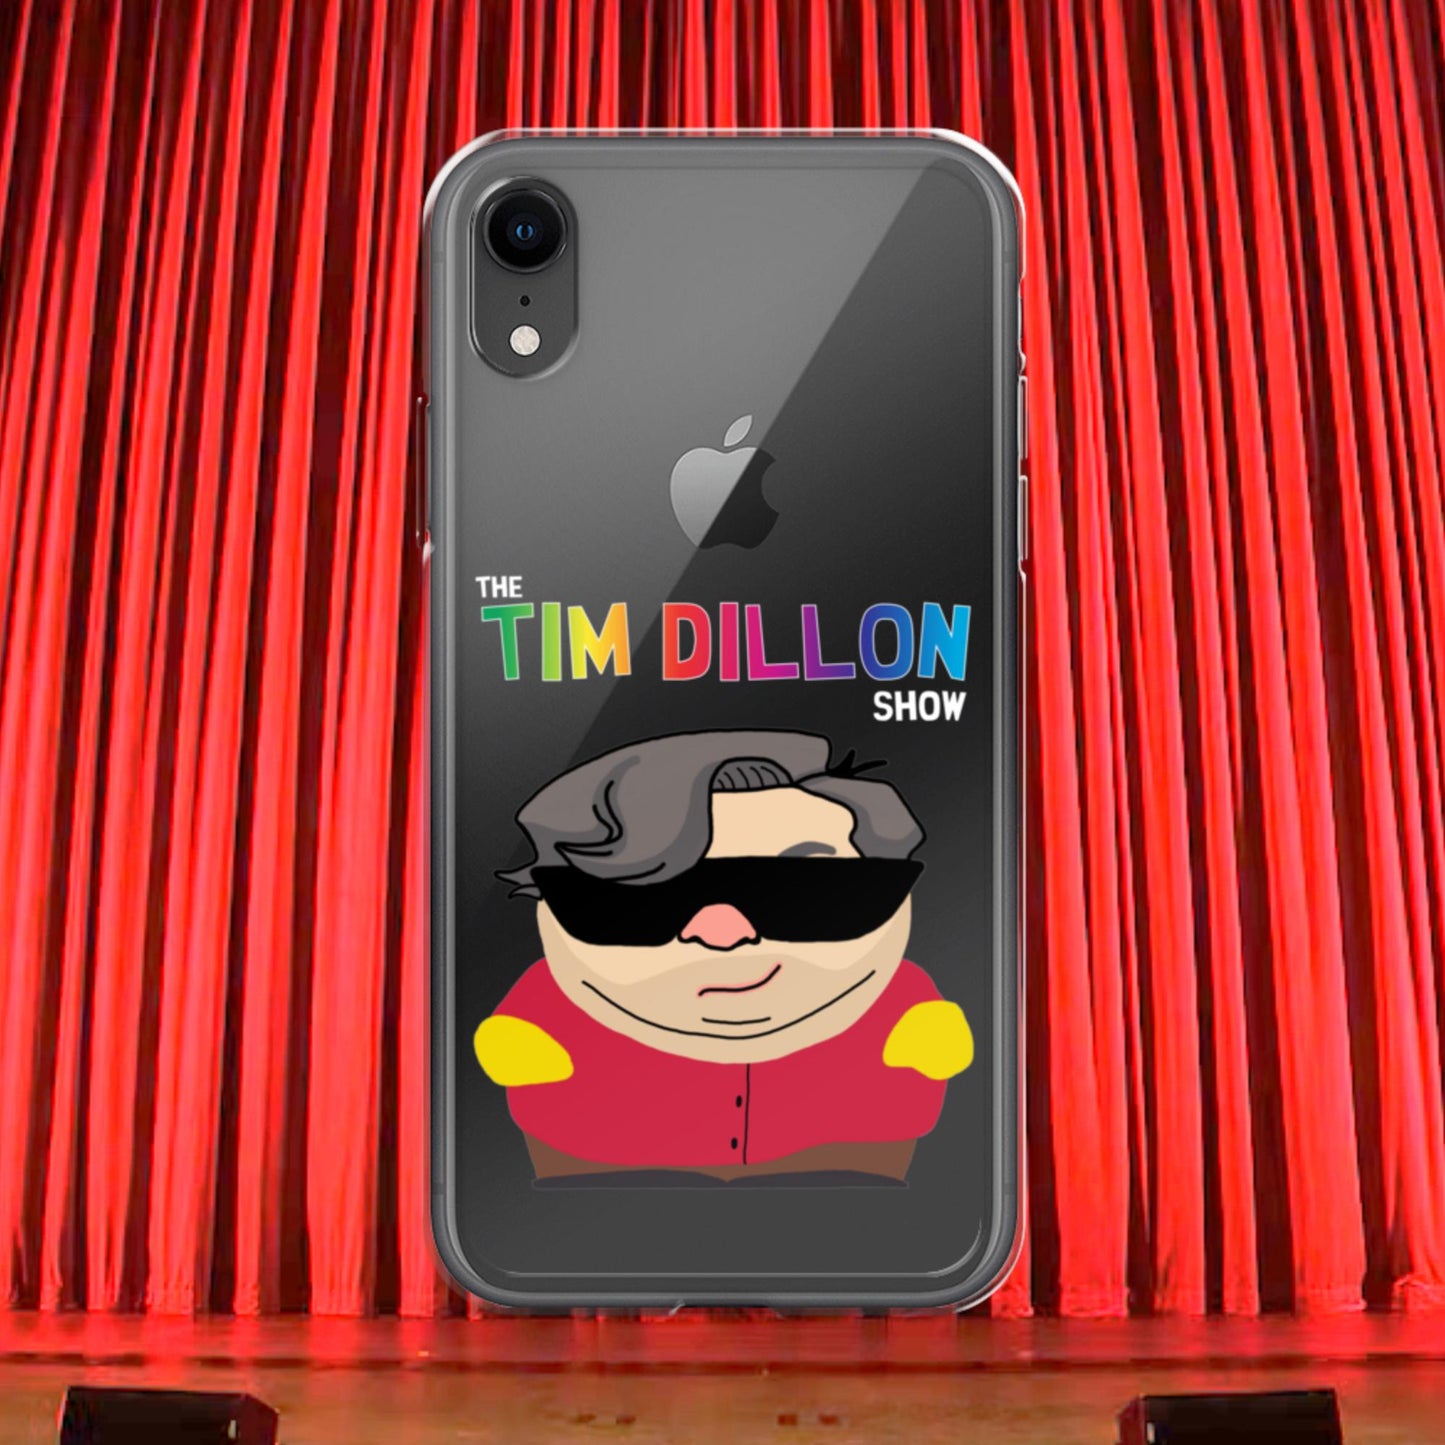 Tim Dillon Cartman, Southpark, The Tim Dillon Show, Tim Dillon Podcast, Tim Dillon Merch, Tim Dillon Clear Case for iPhone Next Cult Brand Podcasts, Stand-up Comedy, Tim Dillon